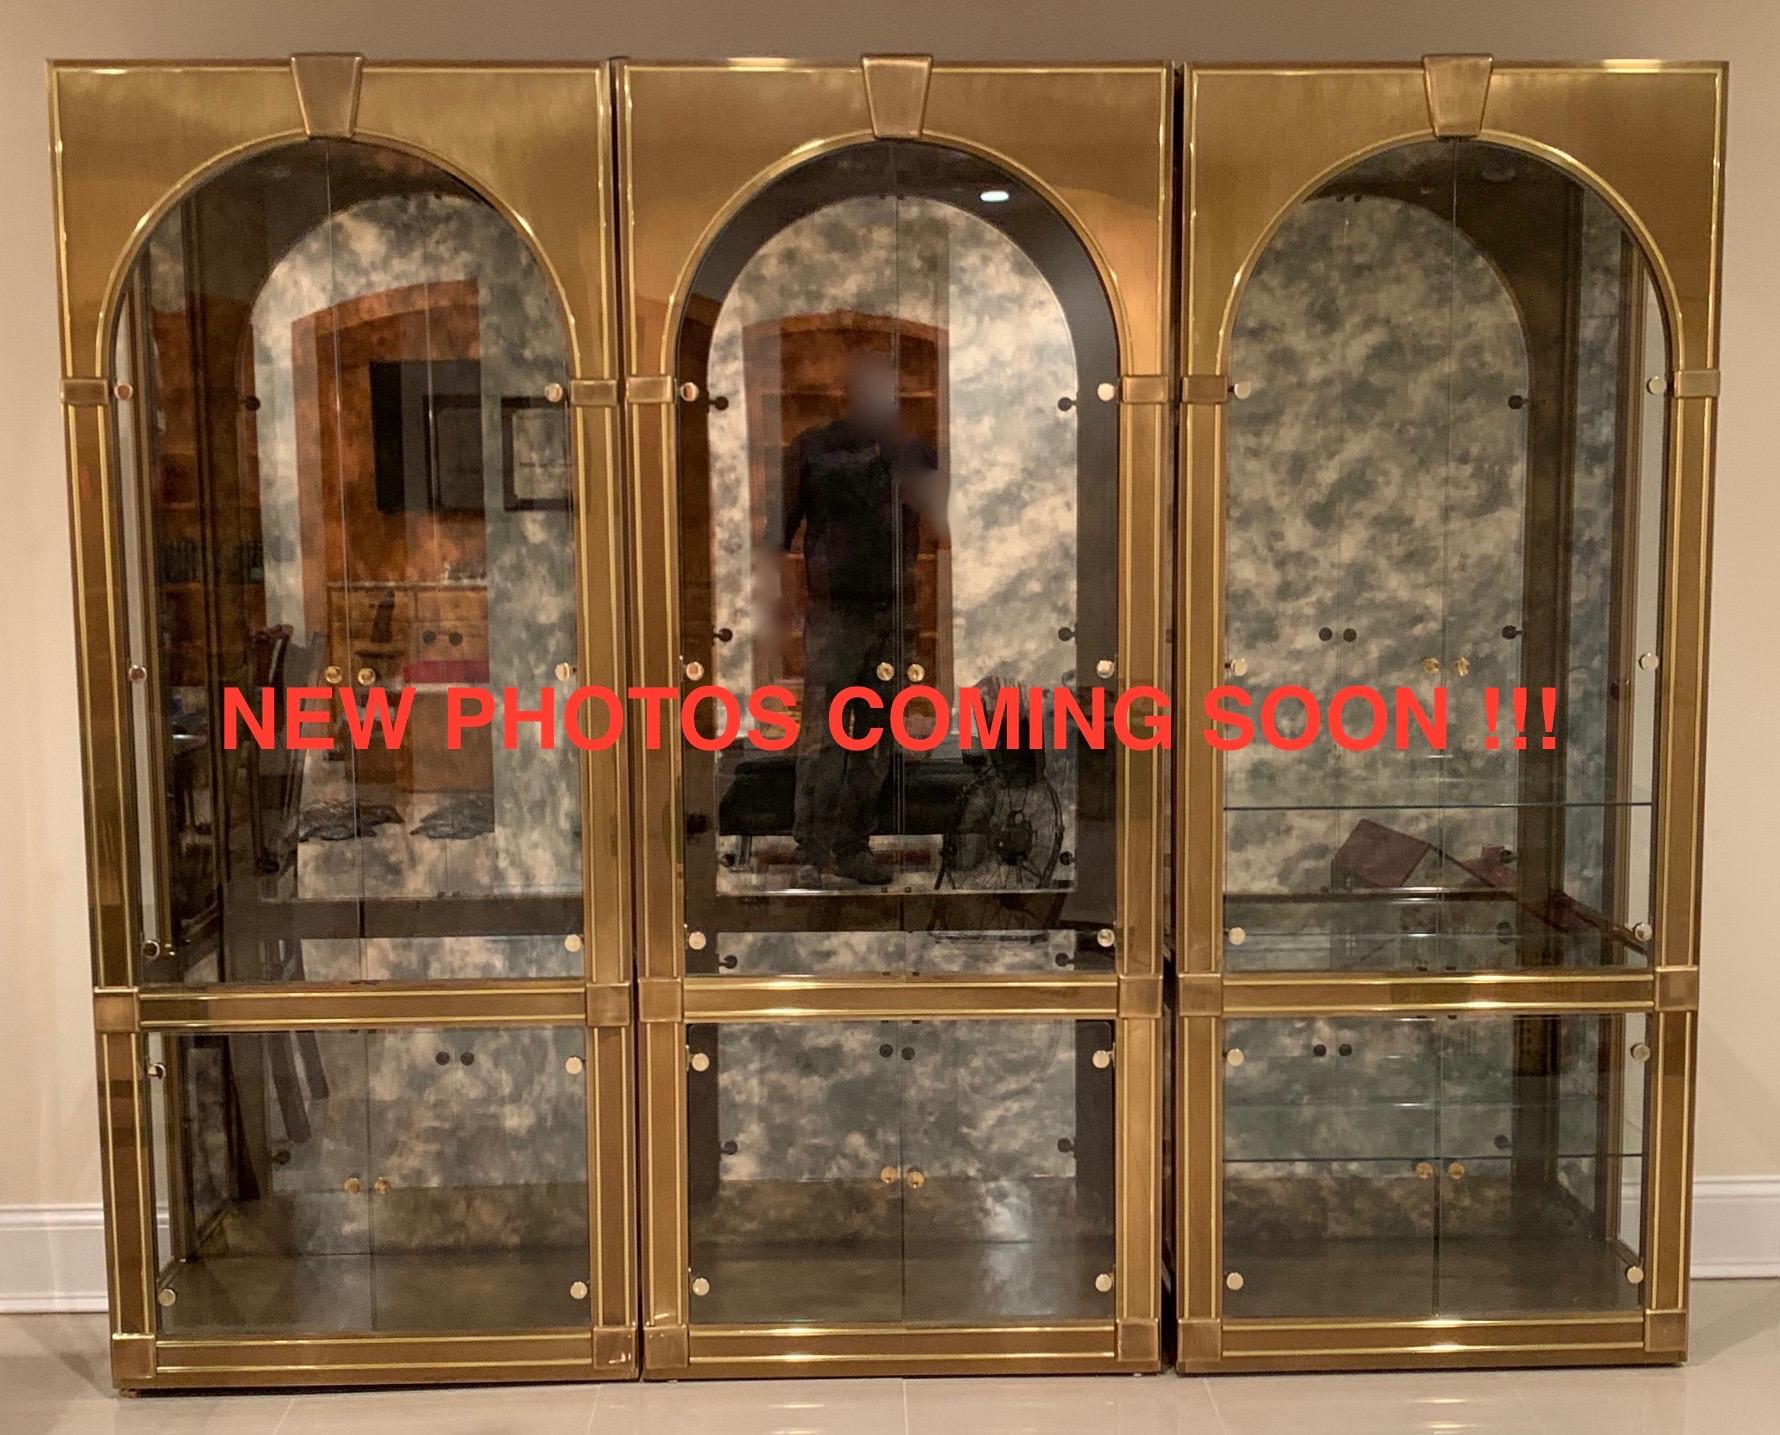 Set of Three Glamours 1970s Mastercraft Palladian style brass clad display cabinets or vitrines with arched doors and keystone pediment. The lighted interior has five glass shelves, four that are adjustable, etched plate grooves and a dramatic